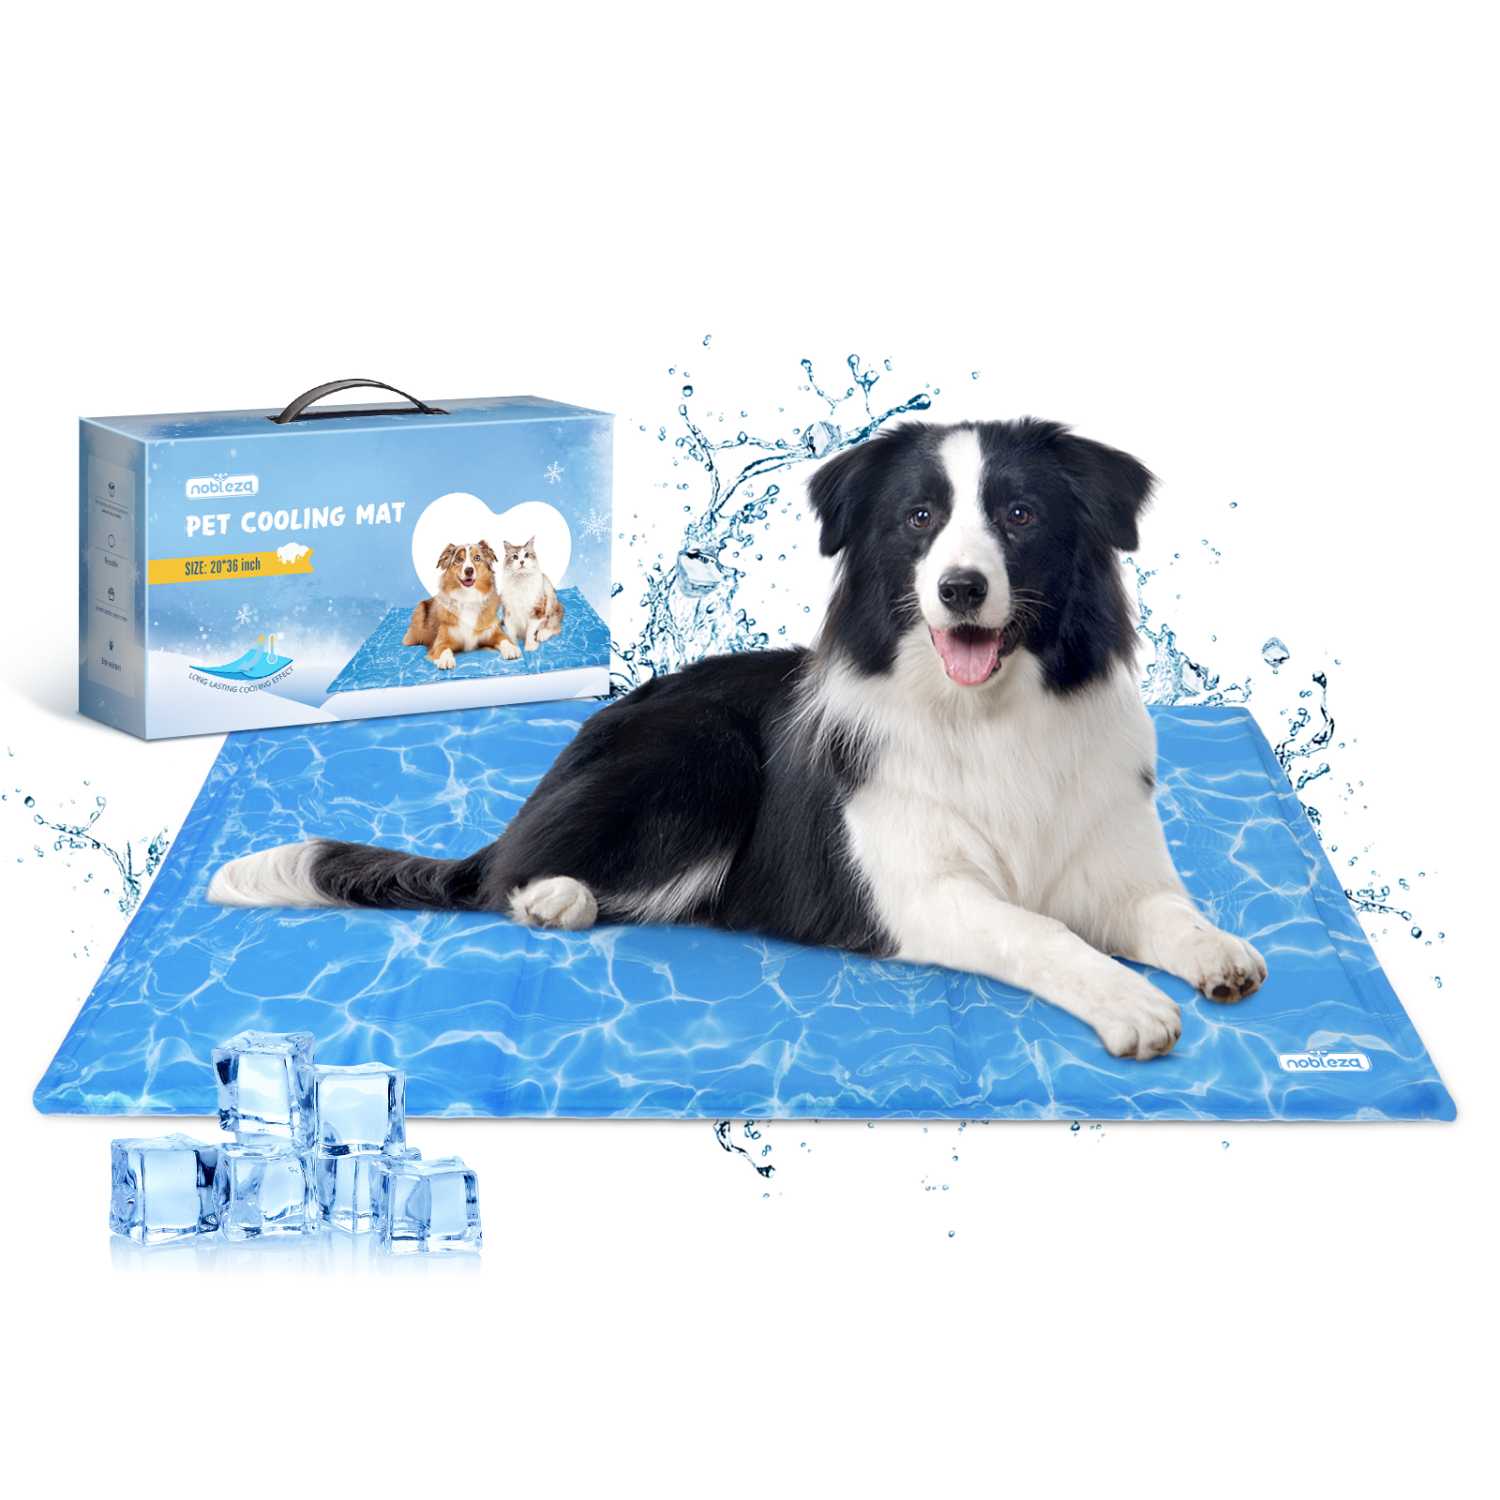 Nobleza Dog Cooling Mat, Durable Gel Dog Cooling Pad Leakproof Pet Cooling Mat Scratch-Resistant Cooling Mat for Medium Dogs Cats Puppy in Hot Summer 20